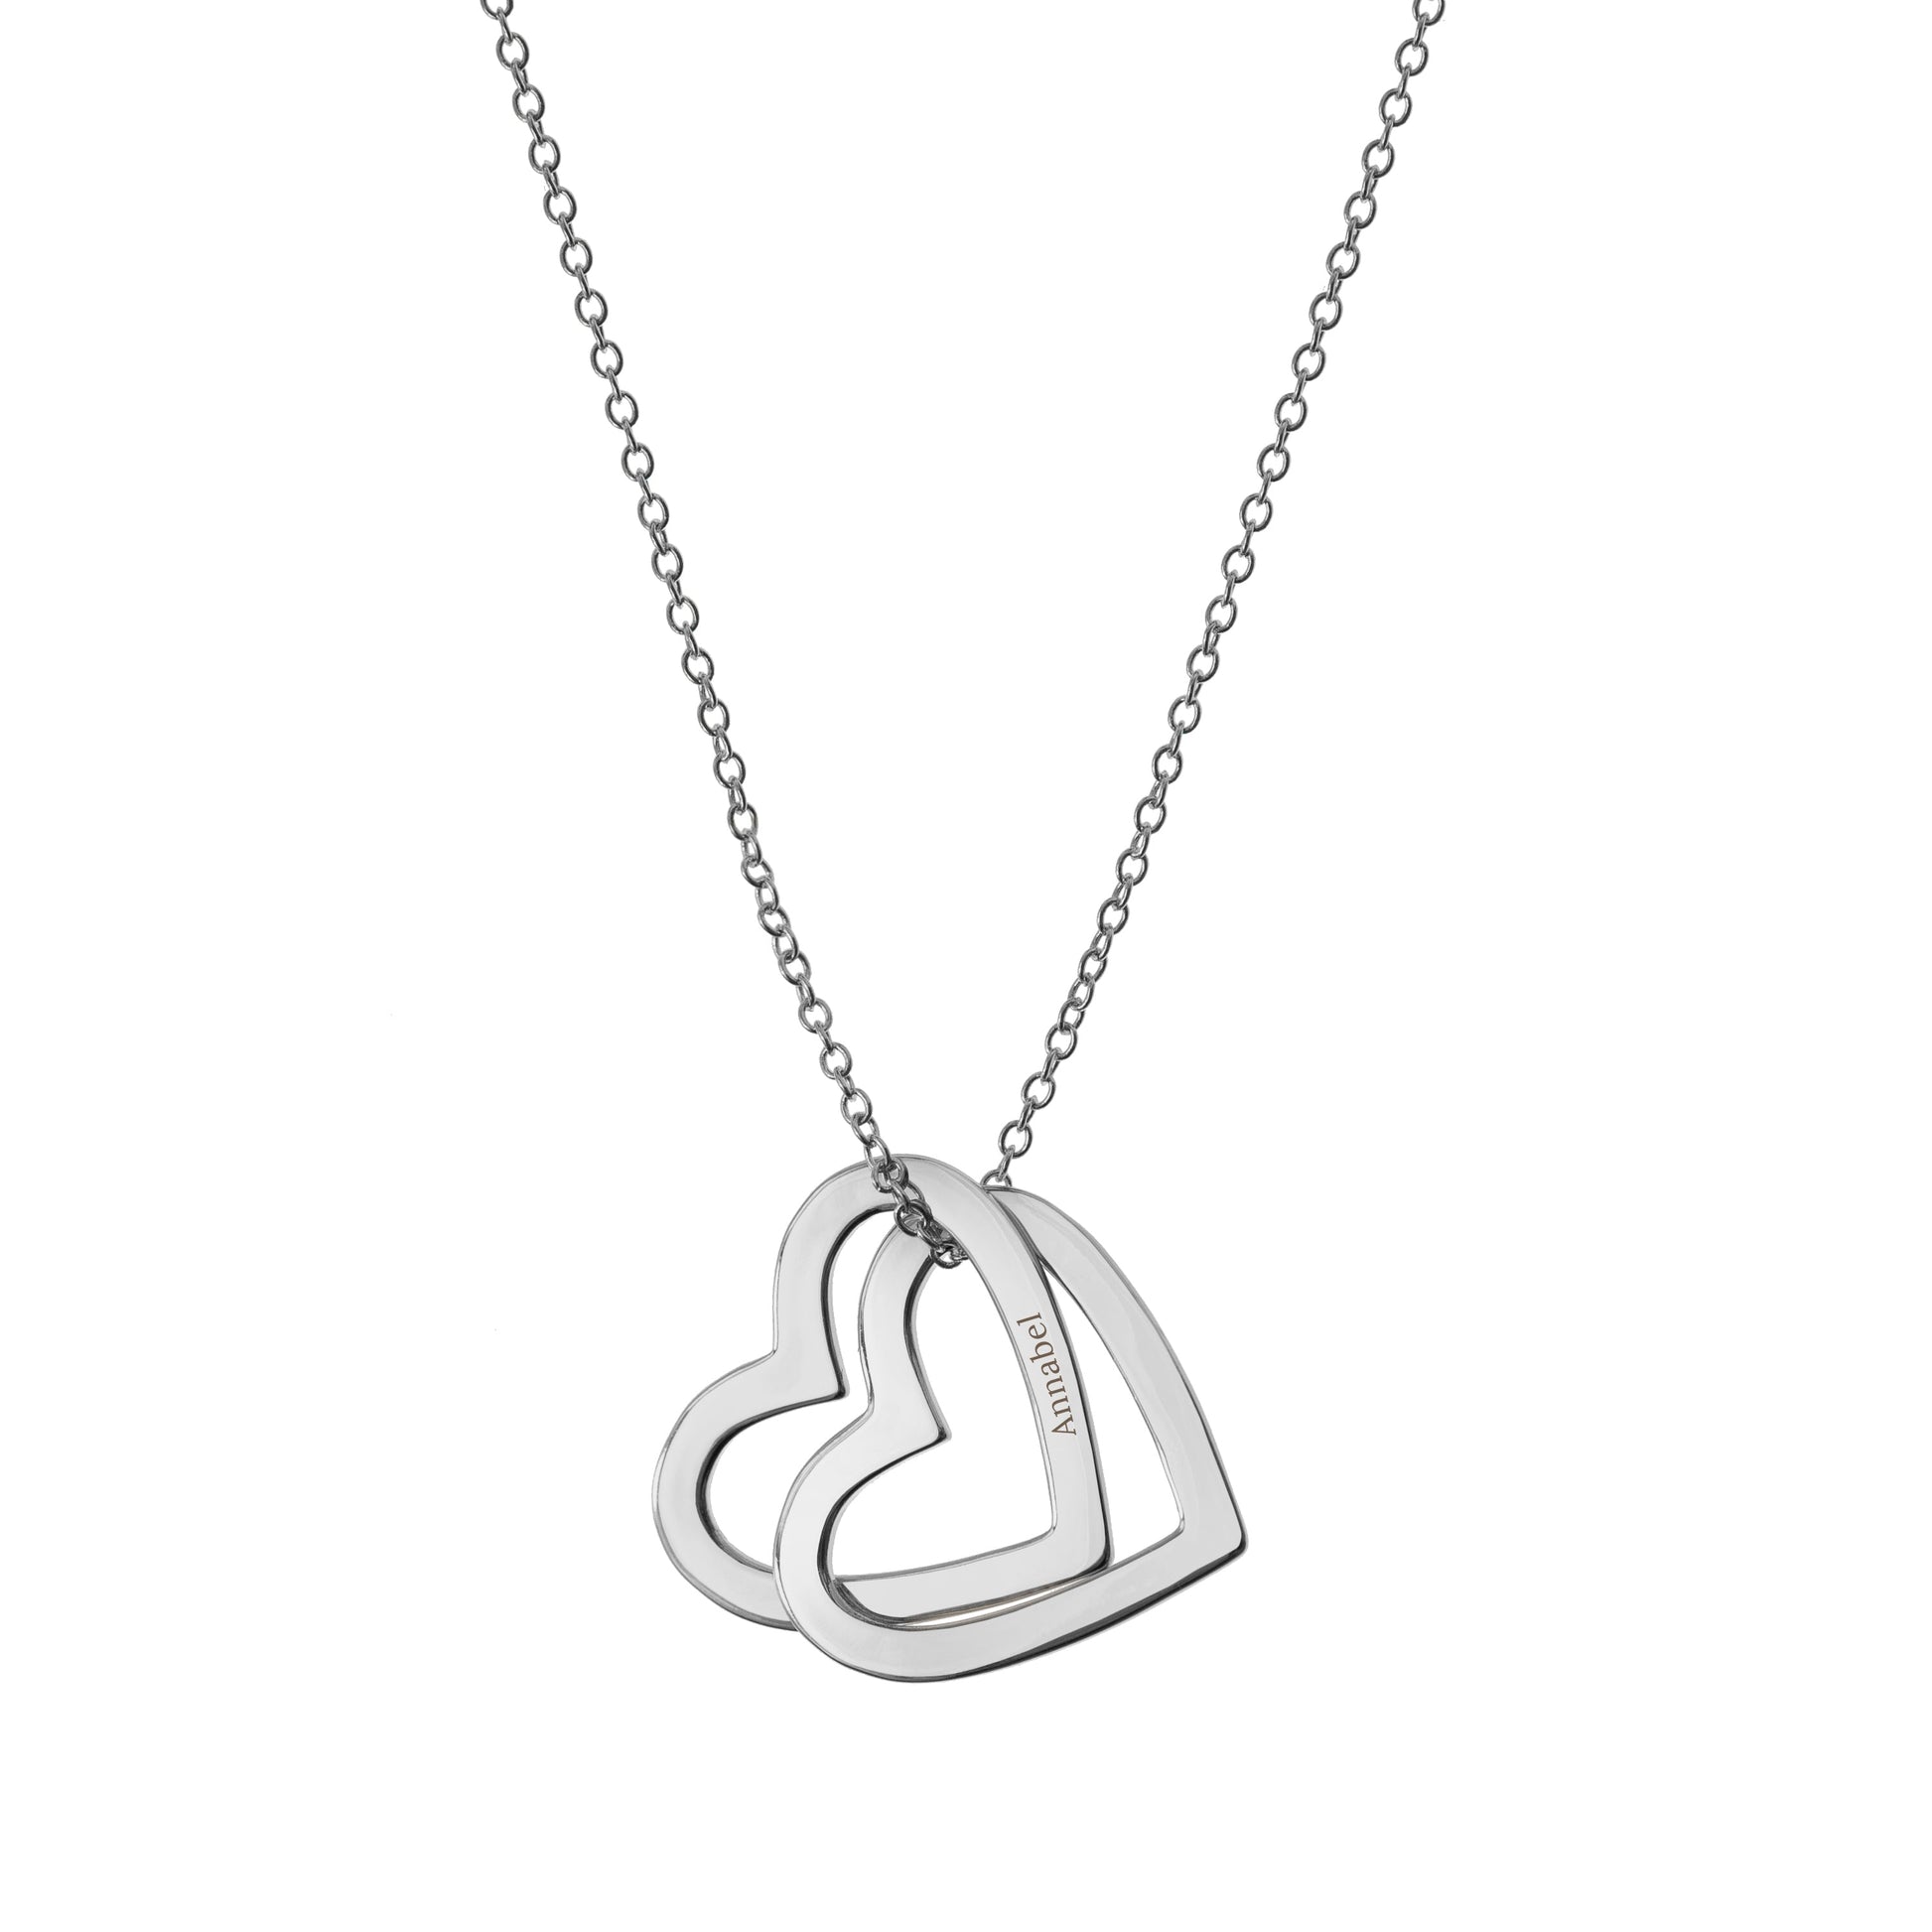 Personalized Necklaces - Personalized Entwined Hearts Necklace 